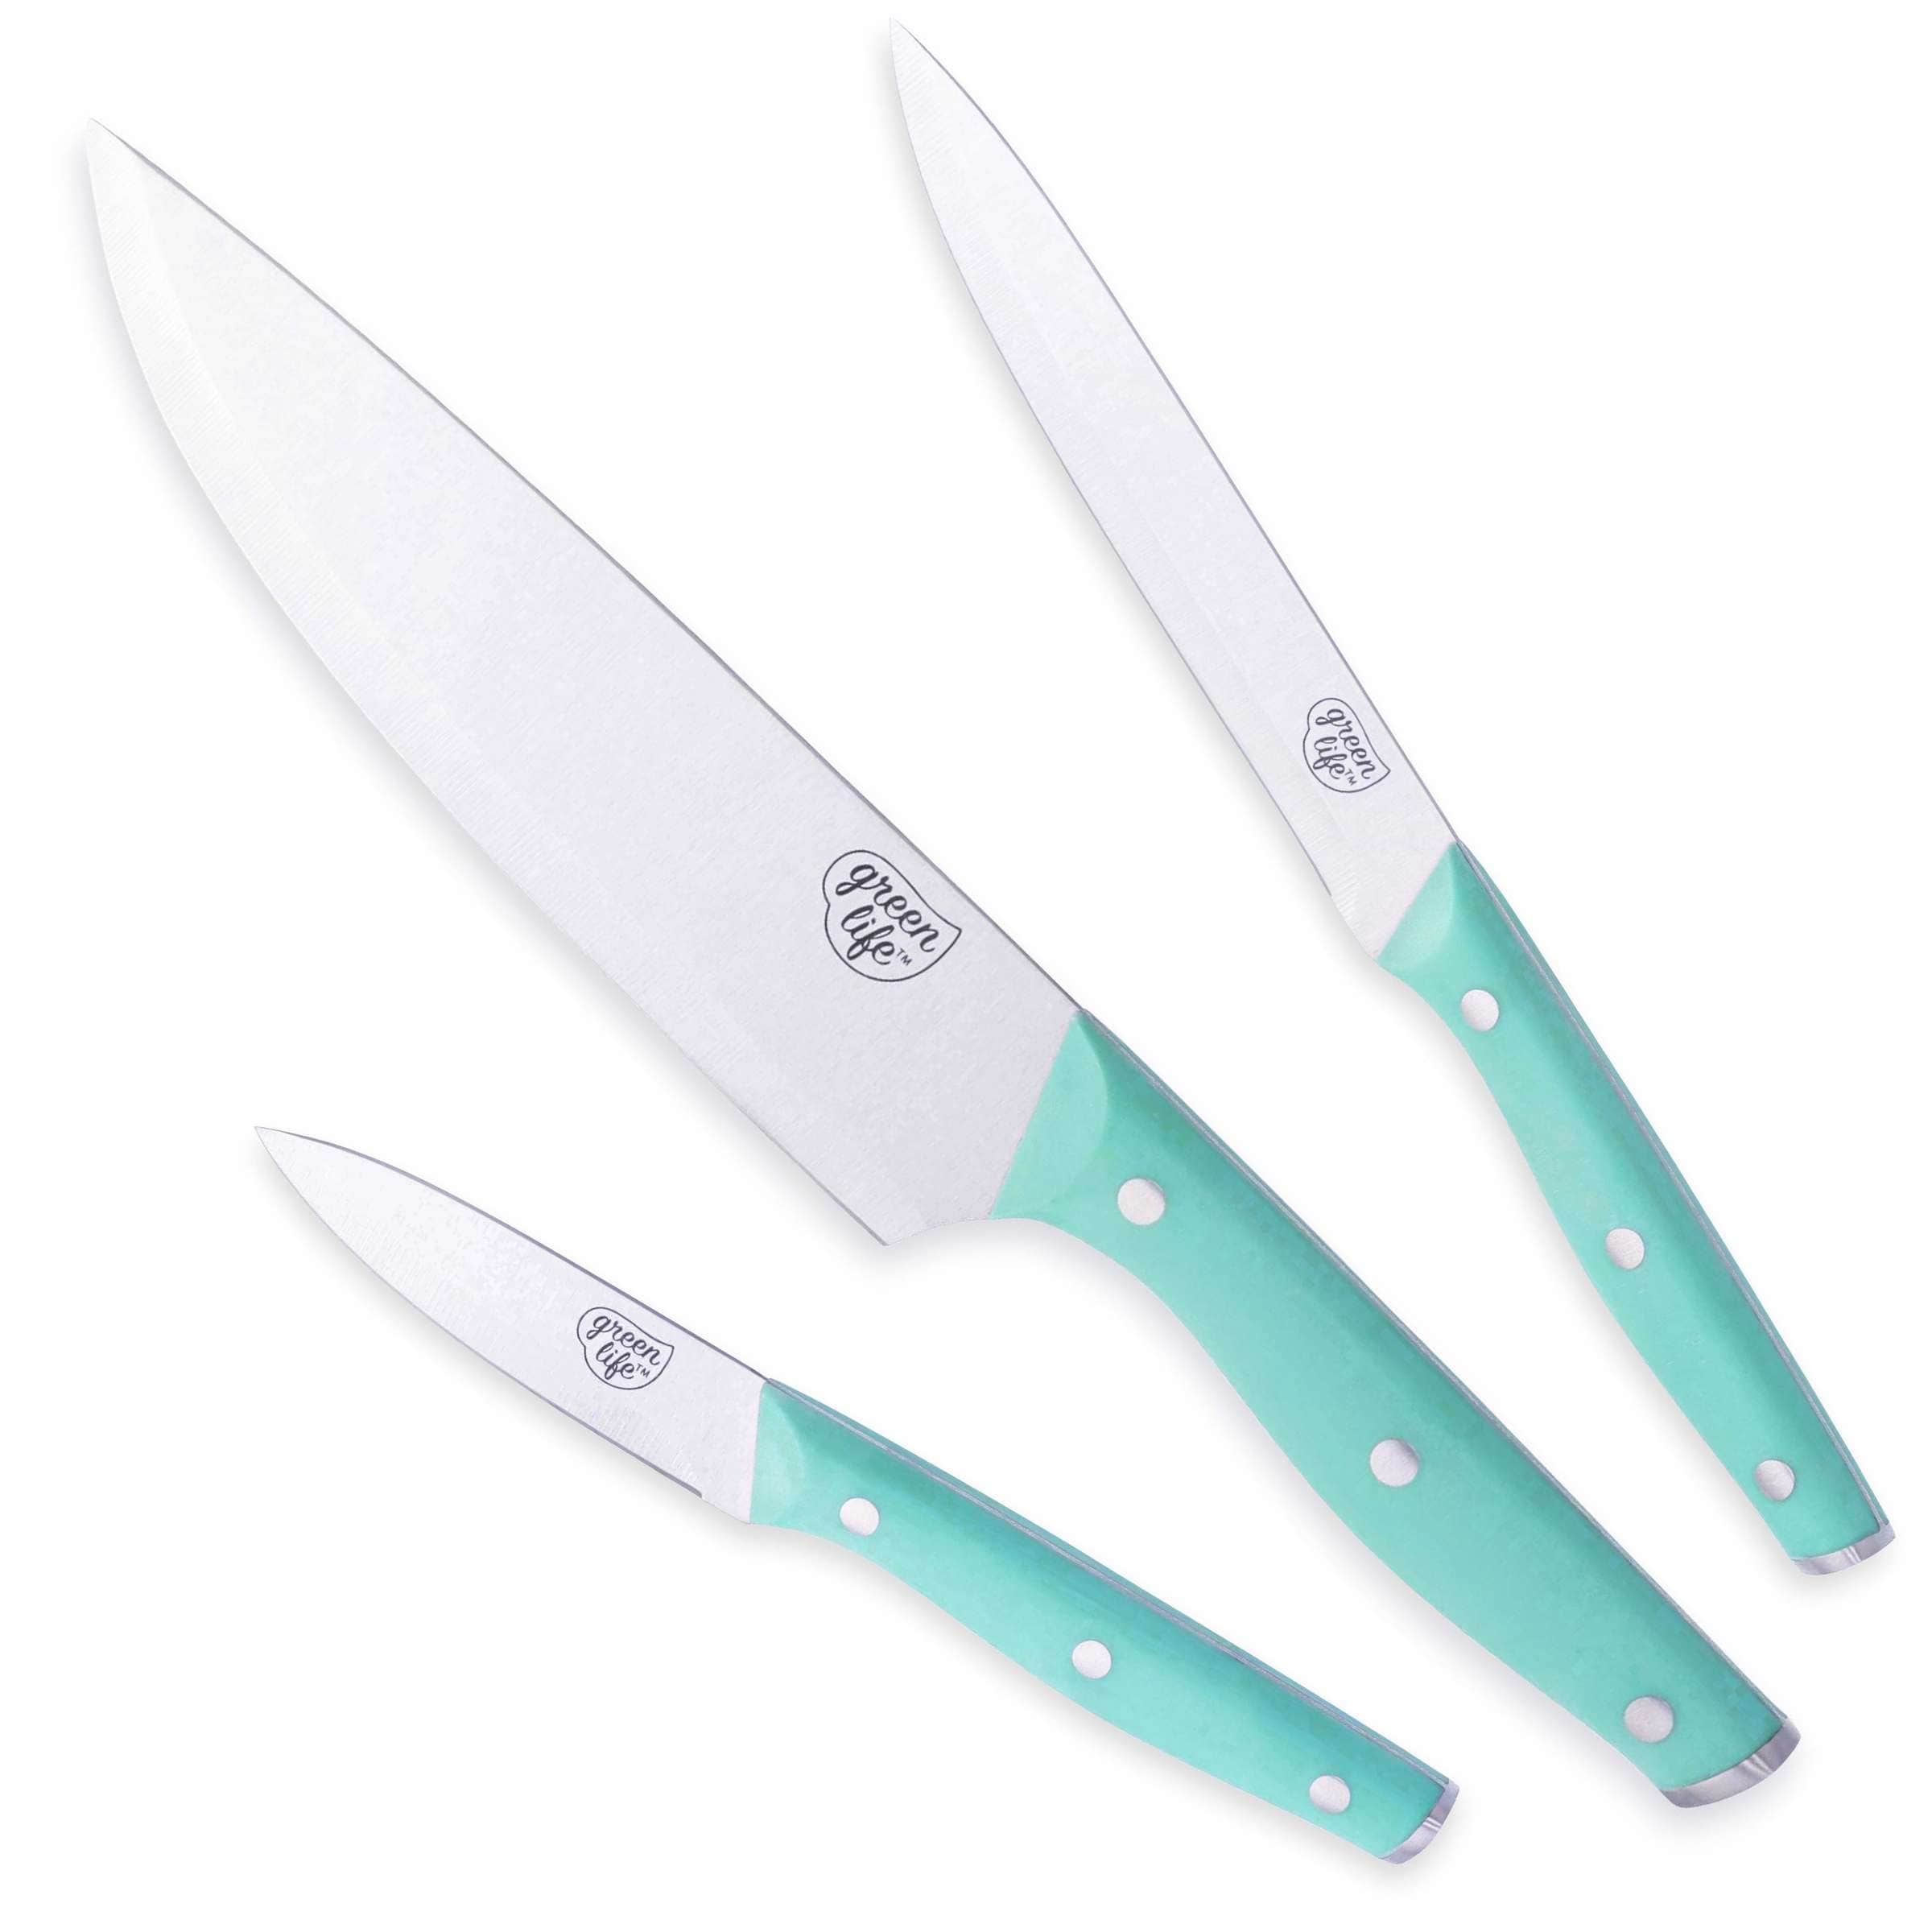 https://ak1.ostkcdn.com/images/products/is/images/direct/620de4d41db0dd760cad1c7aceea56db3f9a6a1f/GreenLife-Cutlery-Stainless-Steel-Knife-Set%2C-3pc.jpg